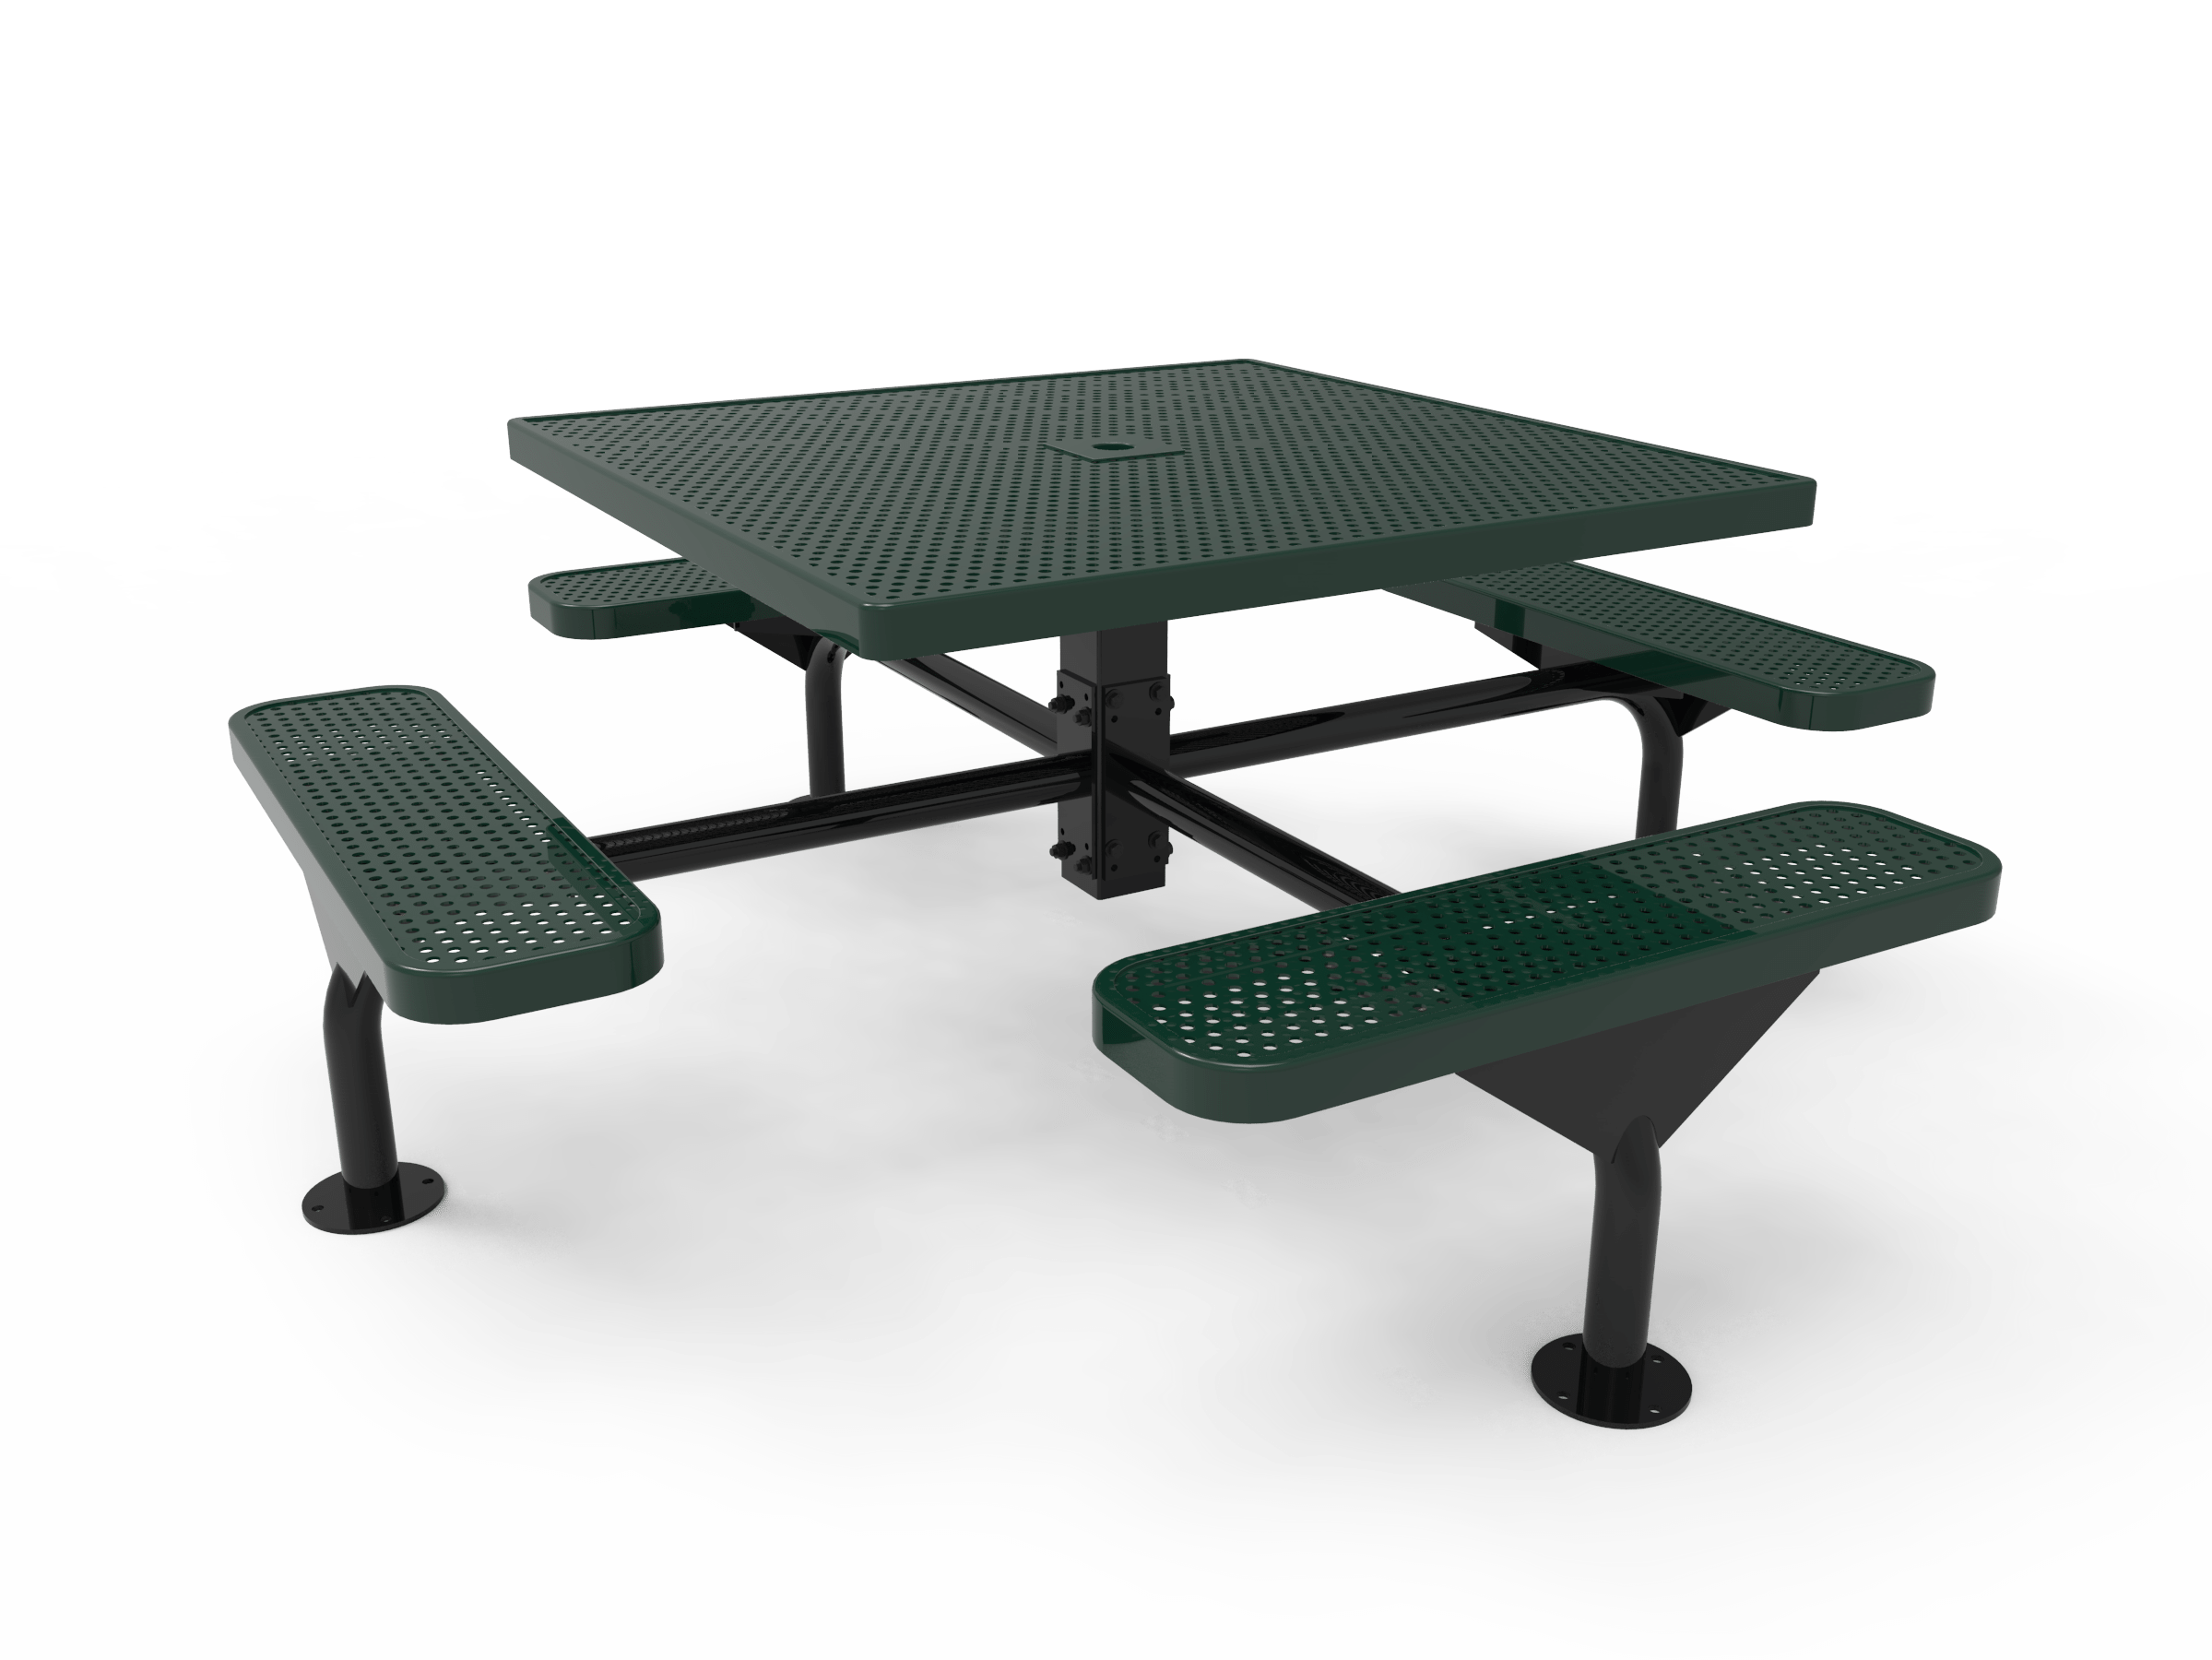 46″ Square Nexus Surface Table With 4 Seats-Punched
TSQ46-D-48-000
Industry Standard Finish
$1319.00
TSQ46-B-48-000
Advantage Premium Finish
$1659.00
